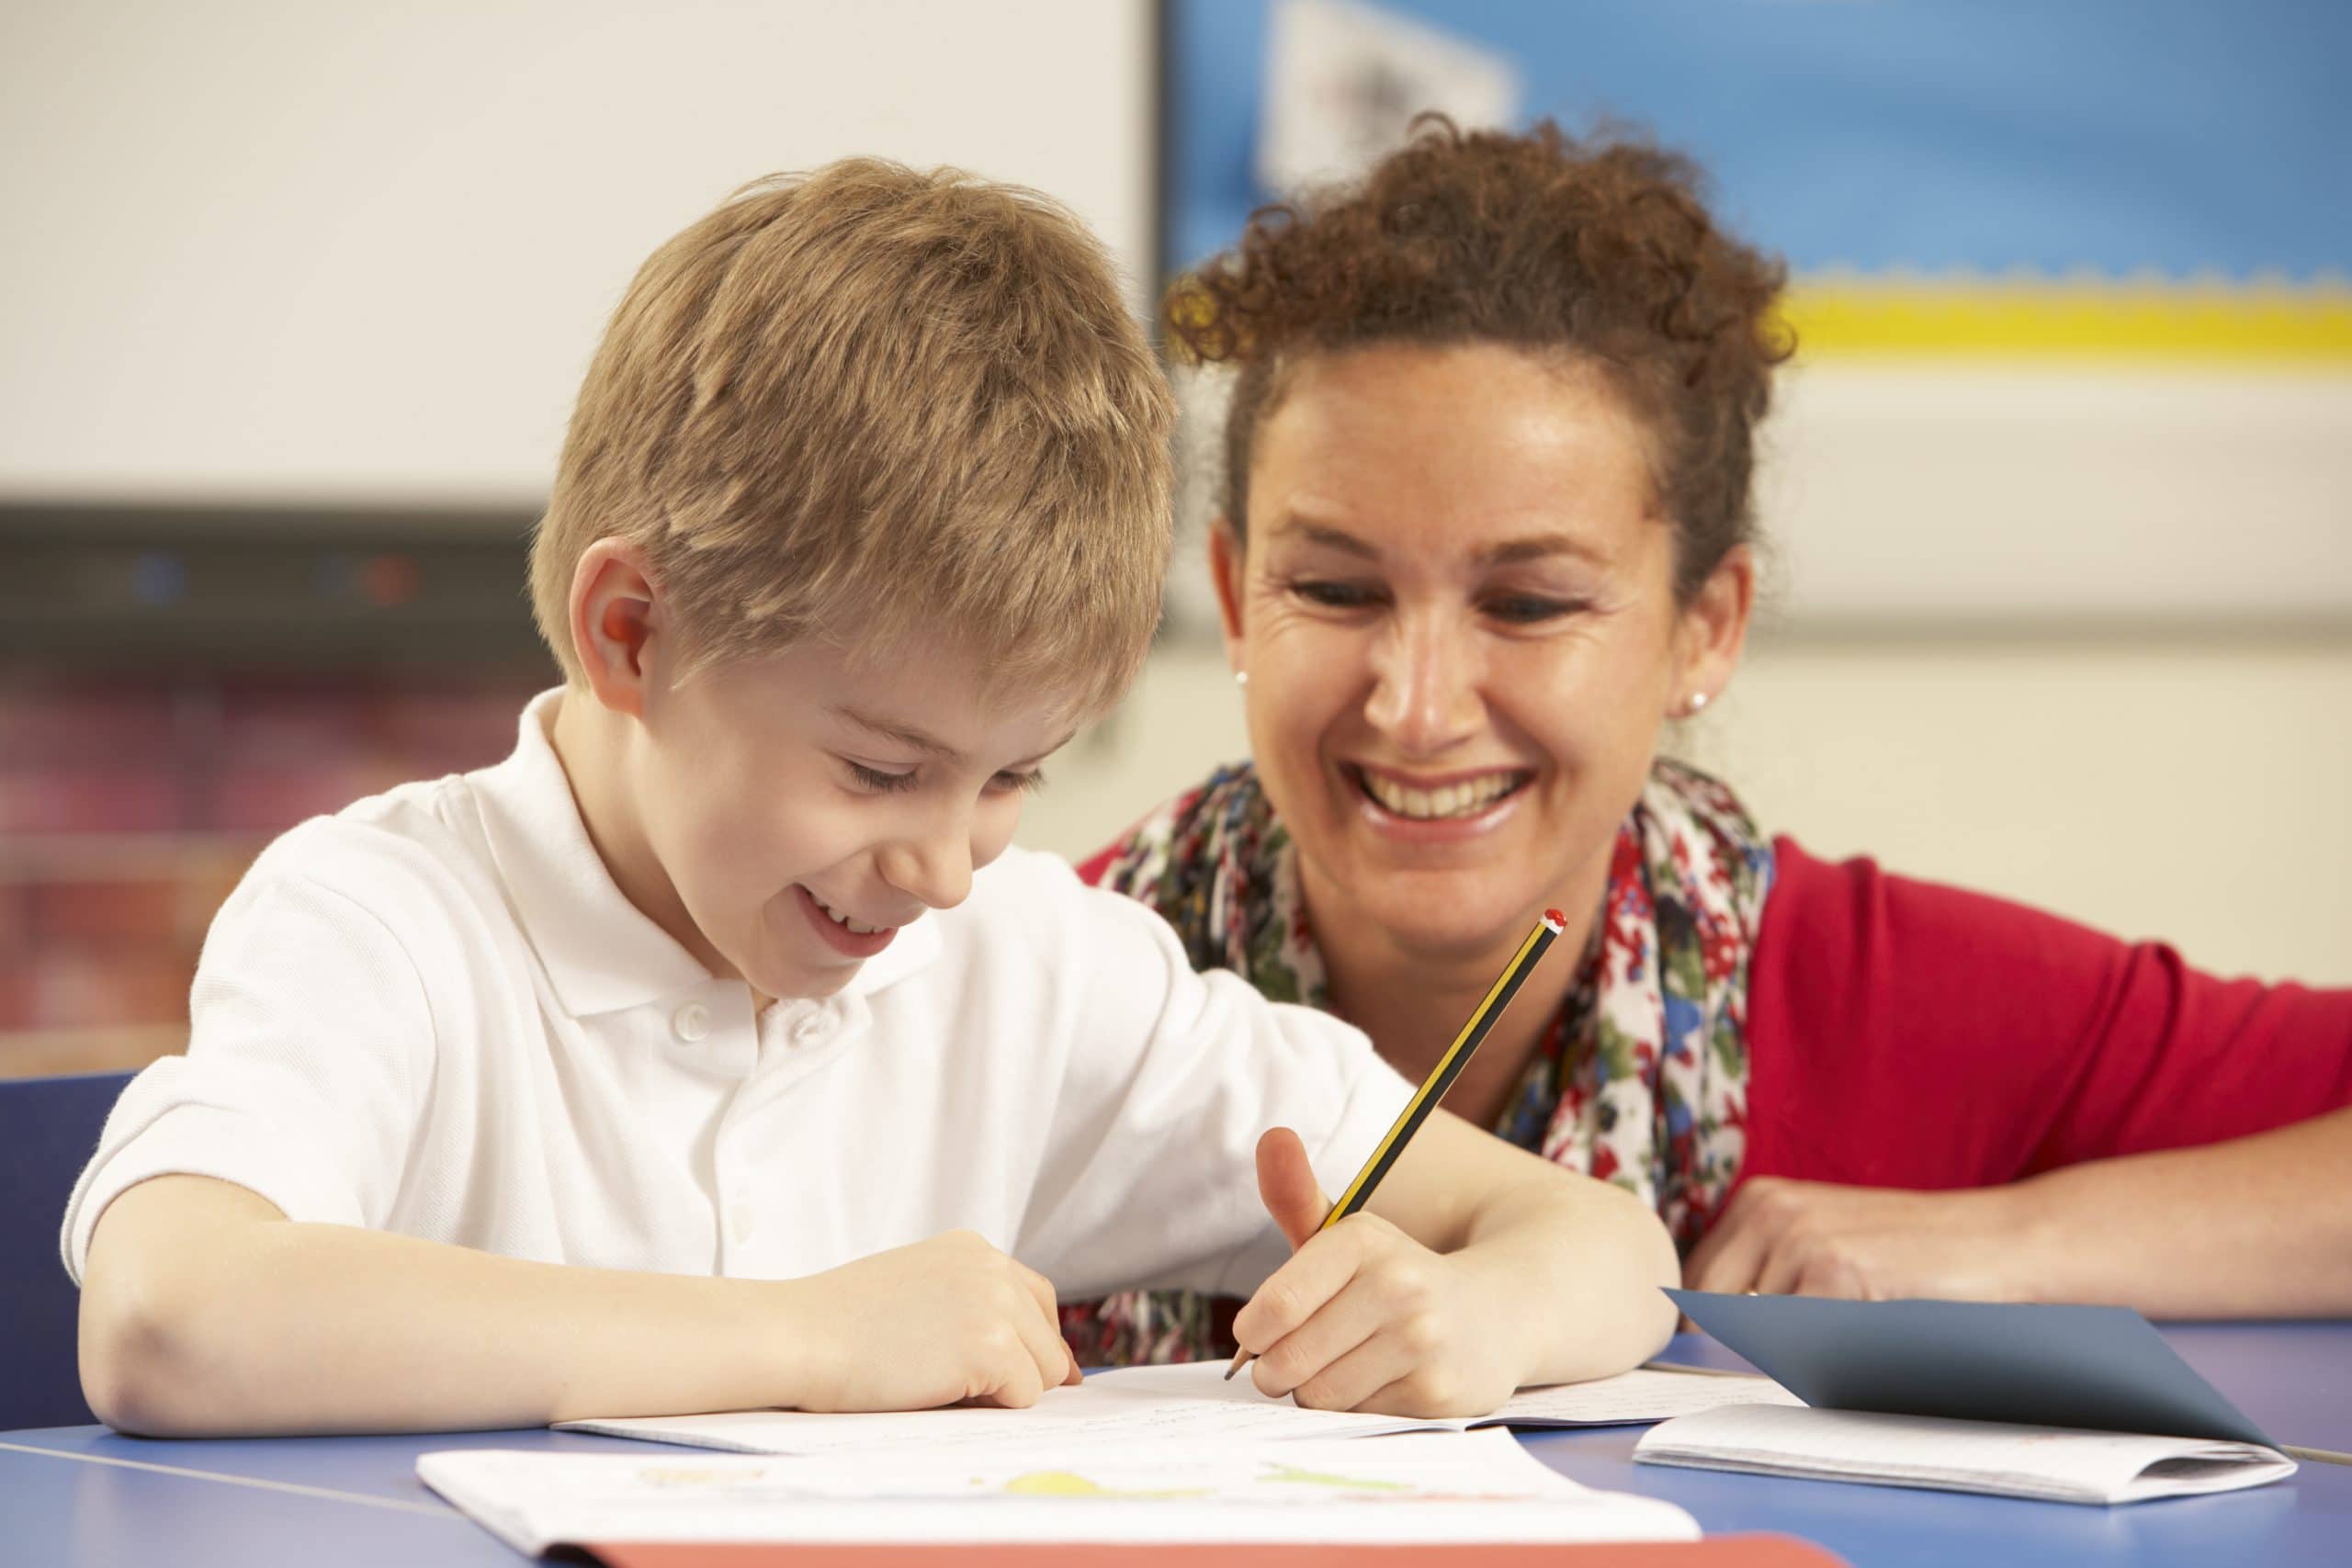 Teacher and child smiling